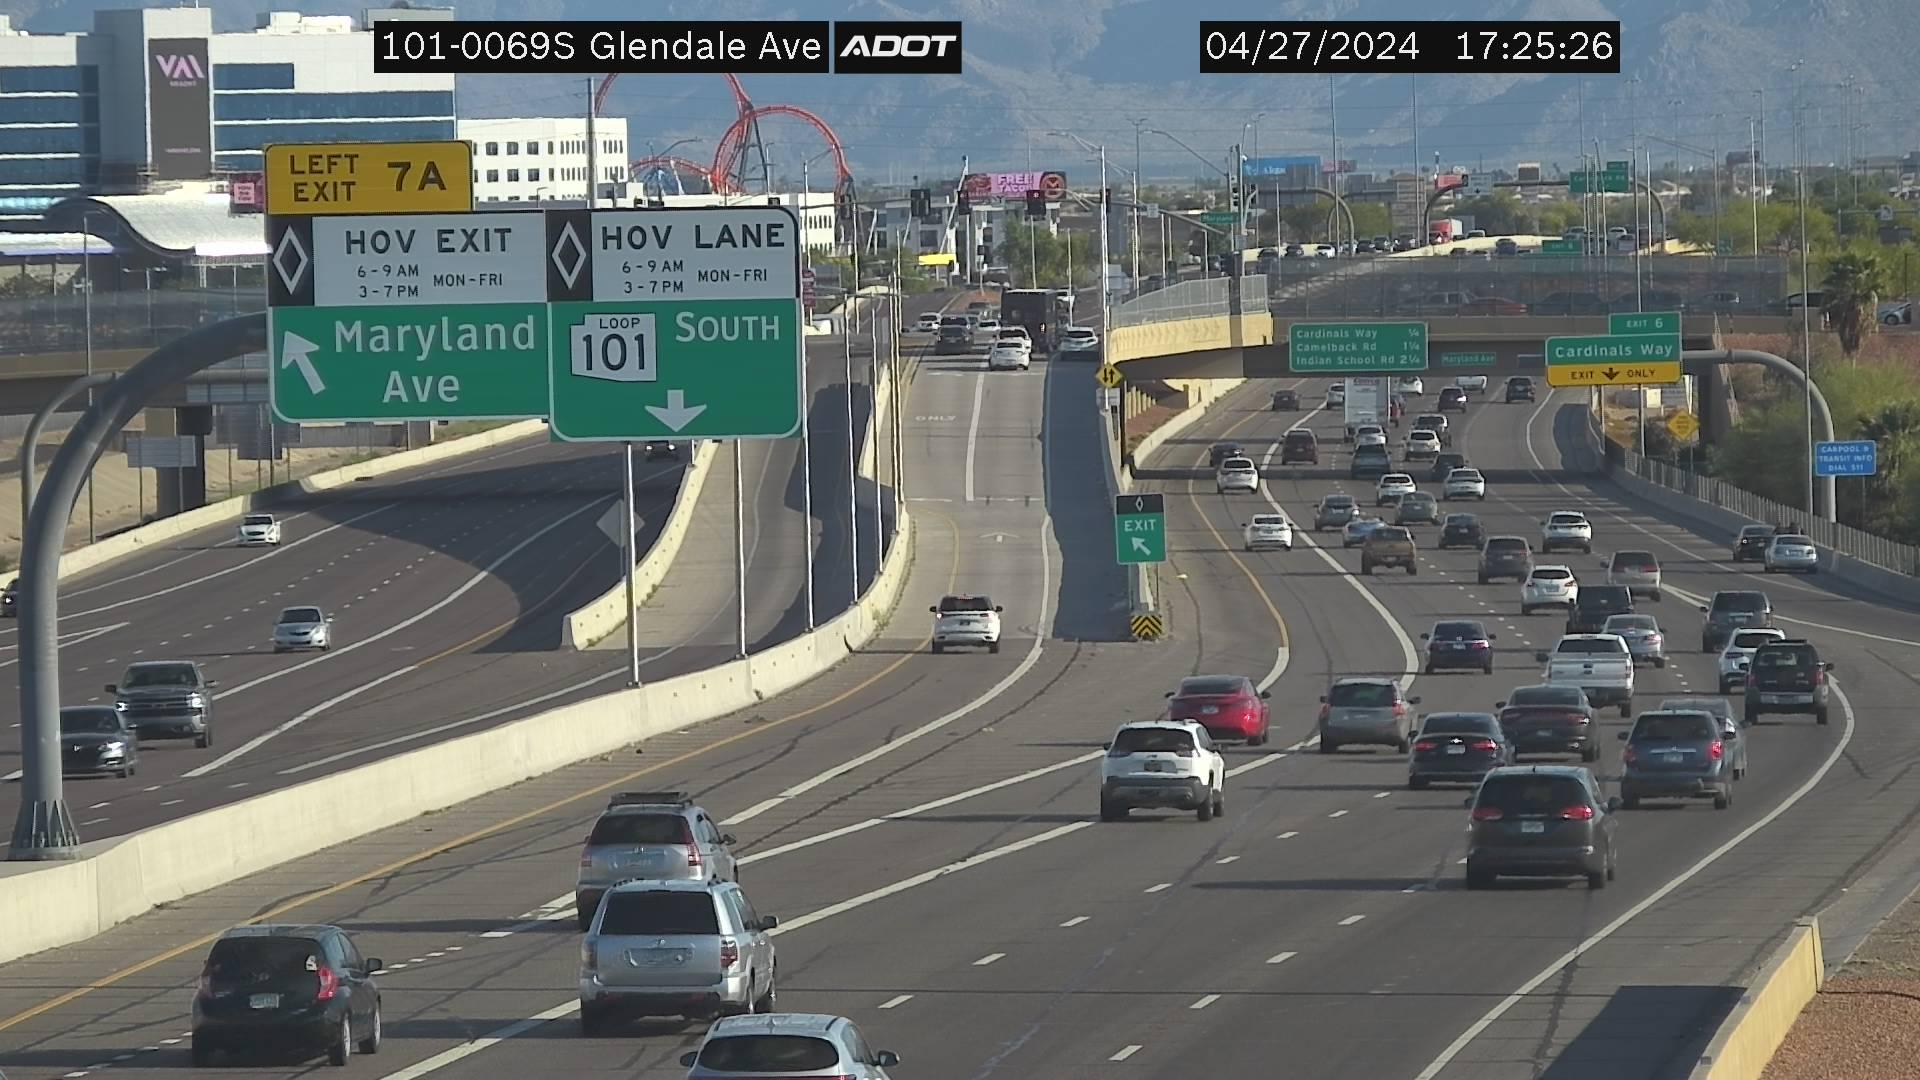 Youngtown › South: L-101 SB 6.91 @Glendale Traffic Camera